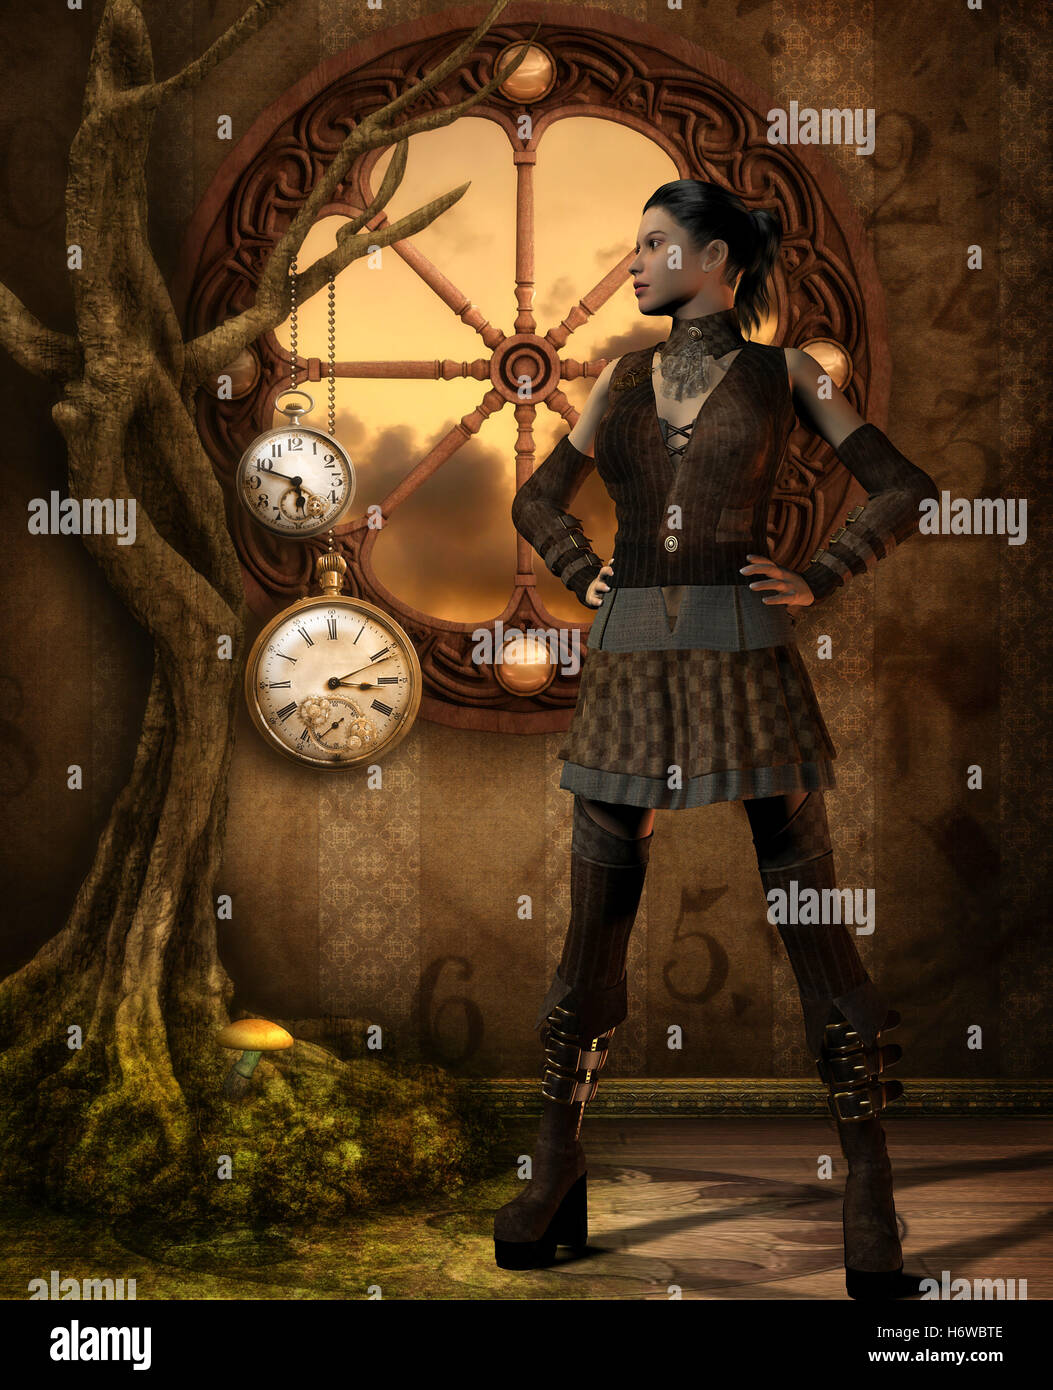 girl in steampunk outfit Stock Photo - Alamy